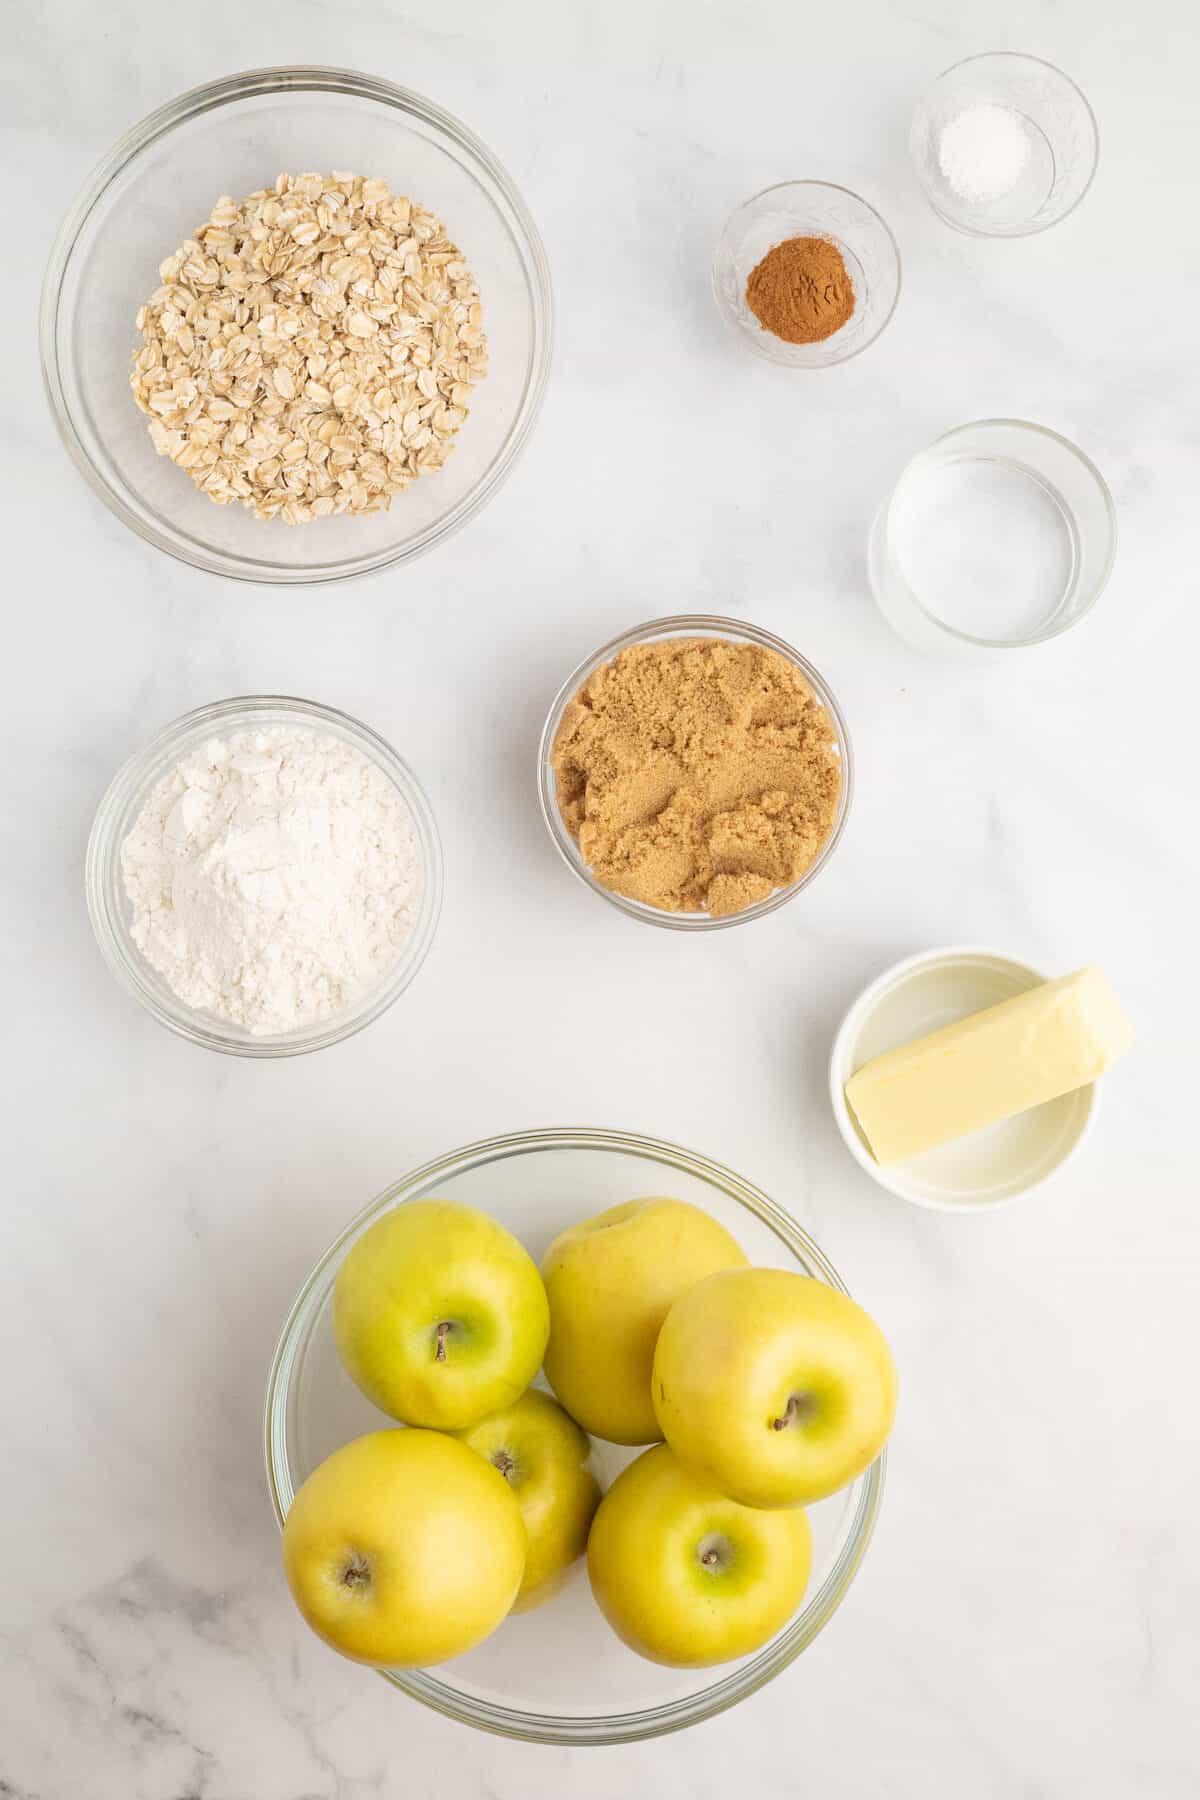 ingredients for the apple crisp in small glass bowls.